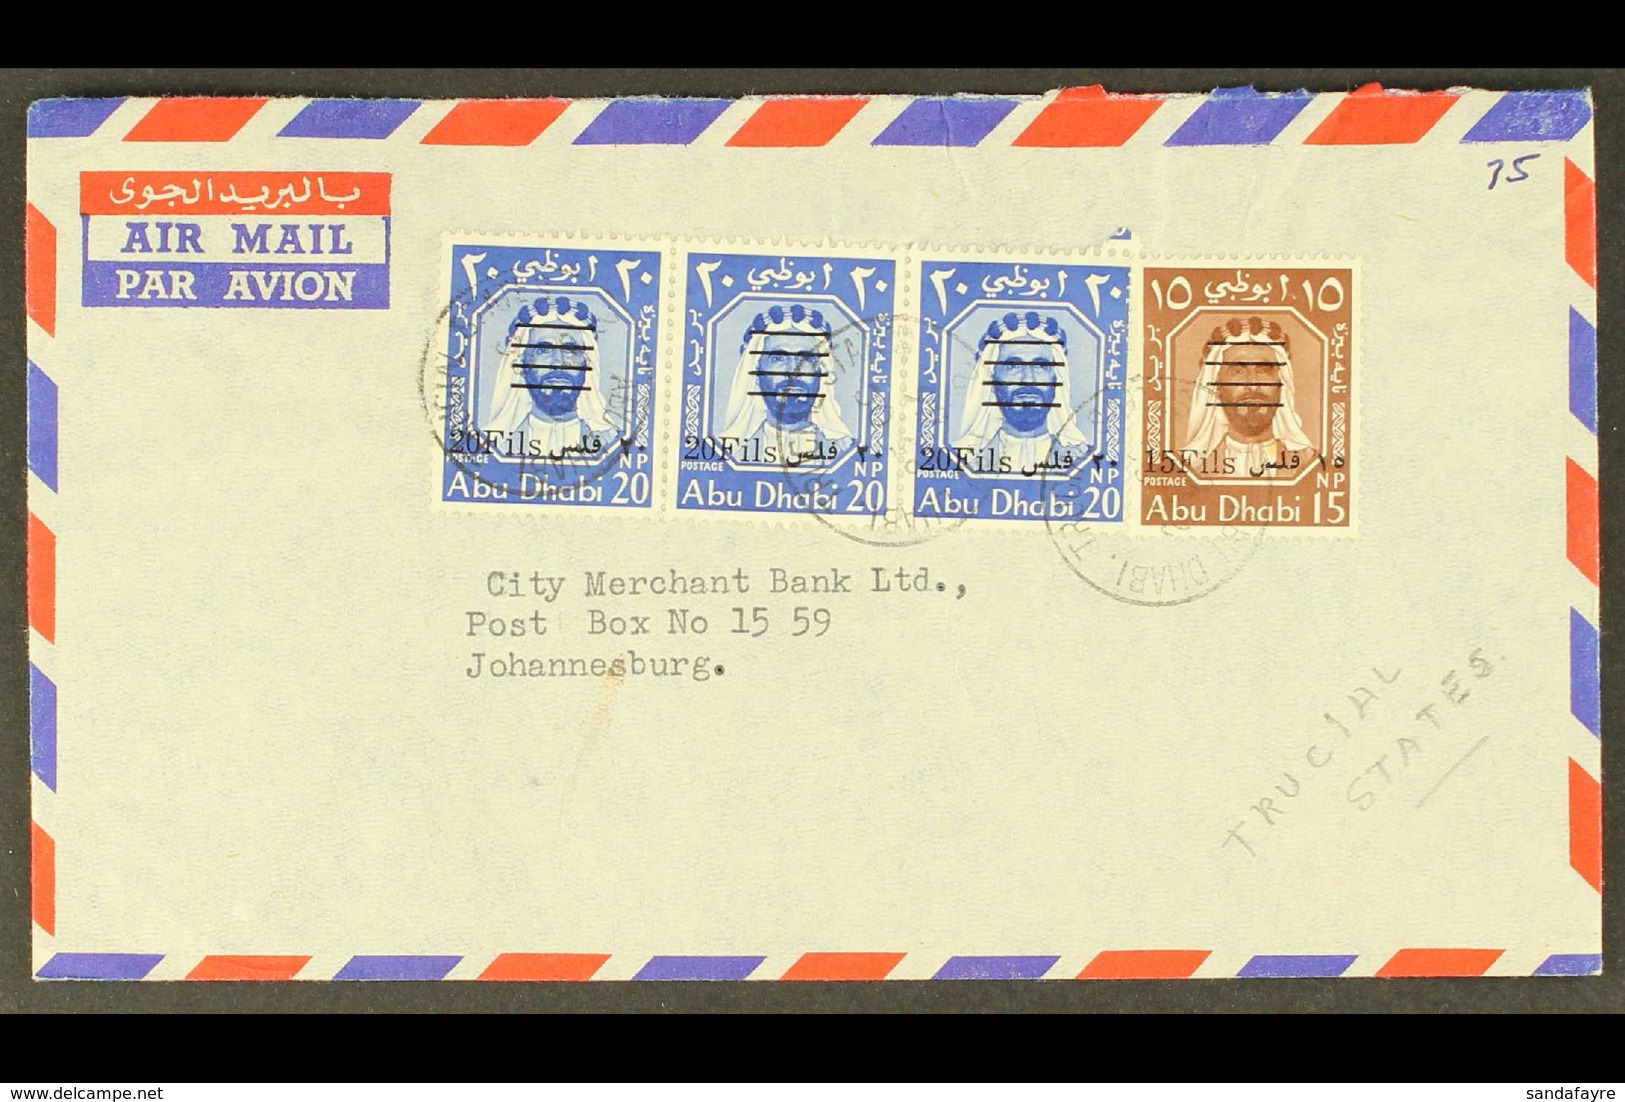 1966 (25 Oct) Air Mail Env To Johannesburg Bearing A Strip Of Three 20f On 20np (SG 17) And A Single 15f On 15np (SG 16) - Abu Dhabi